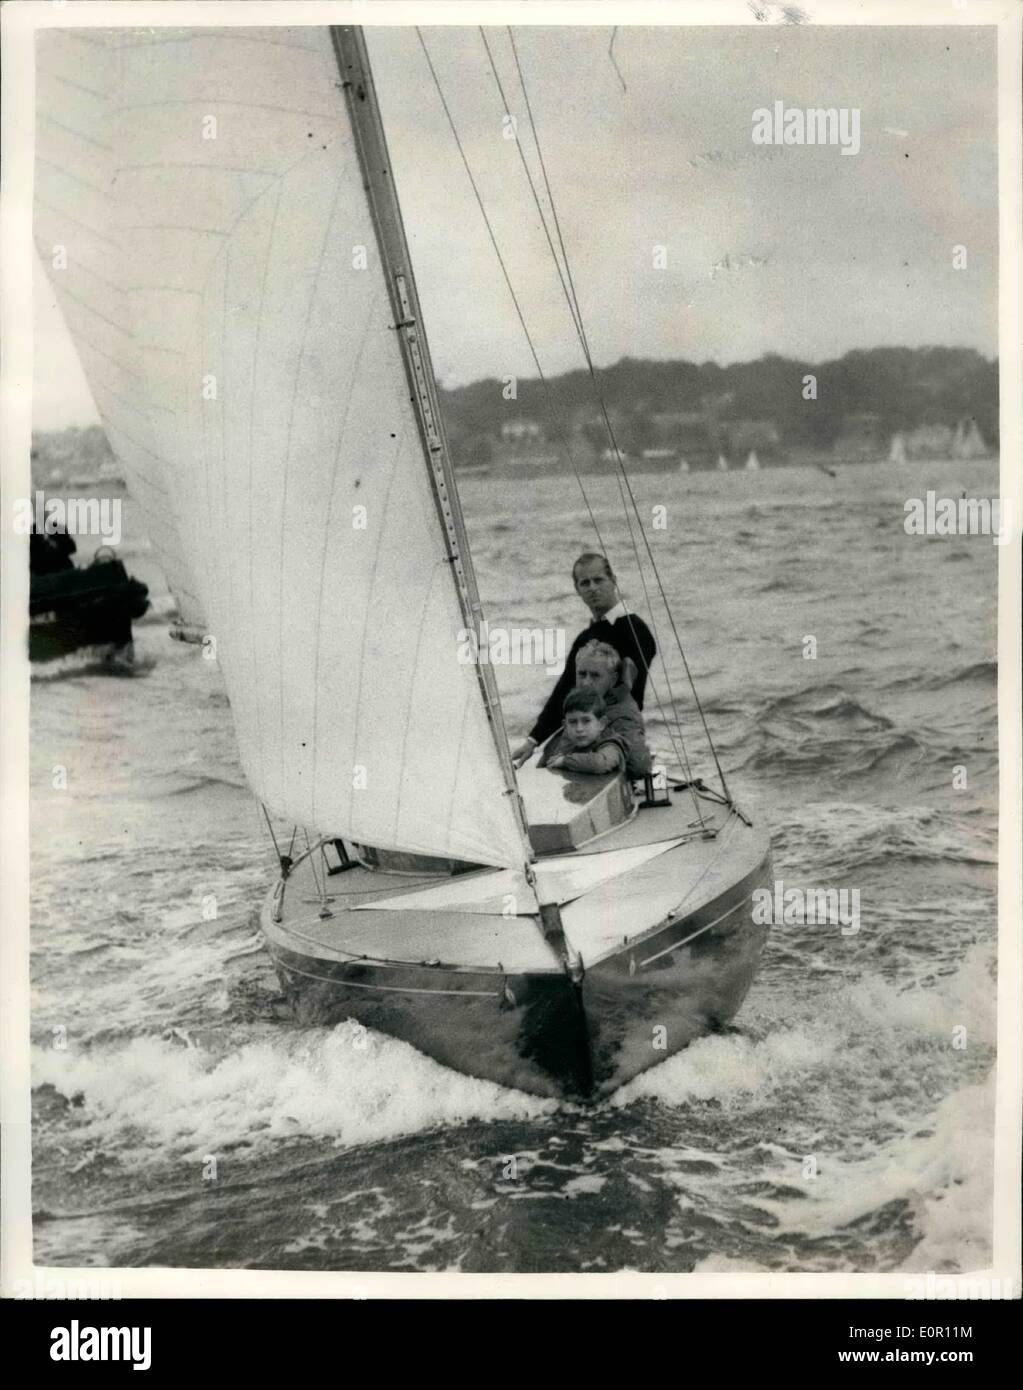 Aug. 08, 1957 - Prince Charles goes yacht racing with his father at Cowes. Prince Charles accompanied his father, The Duke of Edinburgh, in the ''Bluebottle'', which is owned by the Duke and the Queen- -when competing in a dragon class race, in the Cowes Regatta today. Photo shows prince Charles seen with his father the Duke of Edinburgh, and Mr. Uffa Fox, abroad the ''Bluebottle'' at Cowes today. Stock Photo